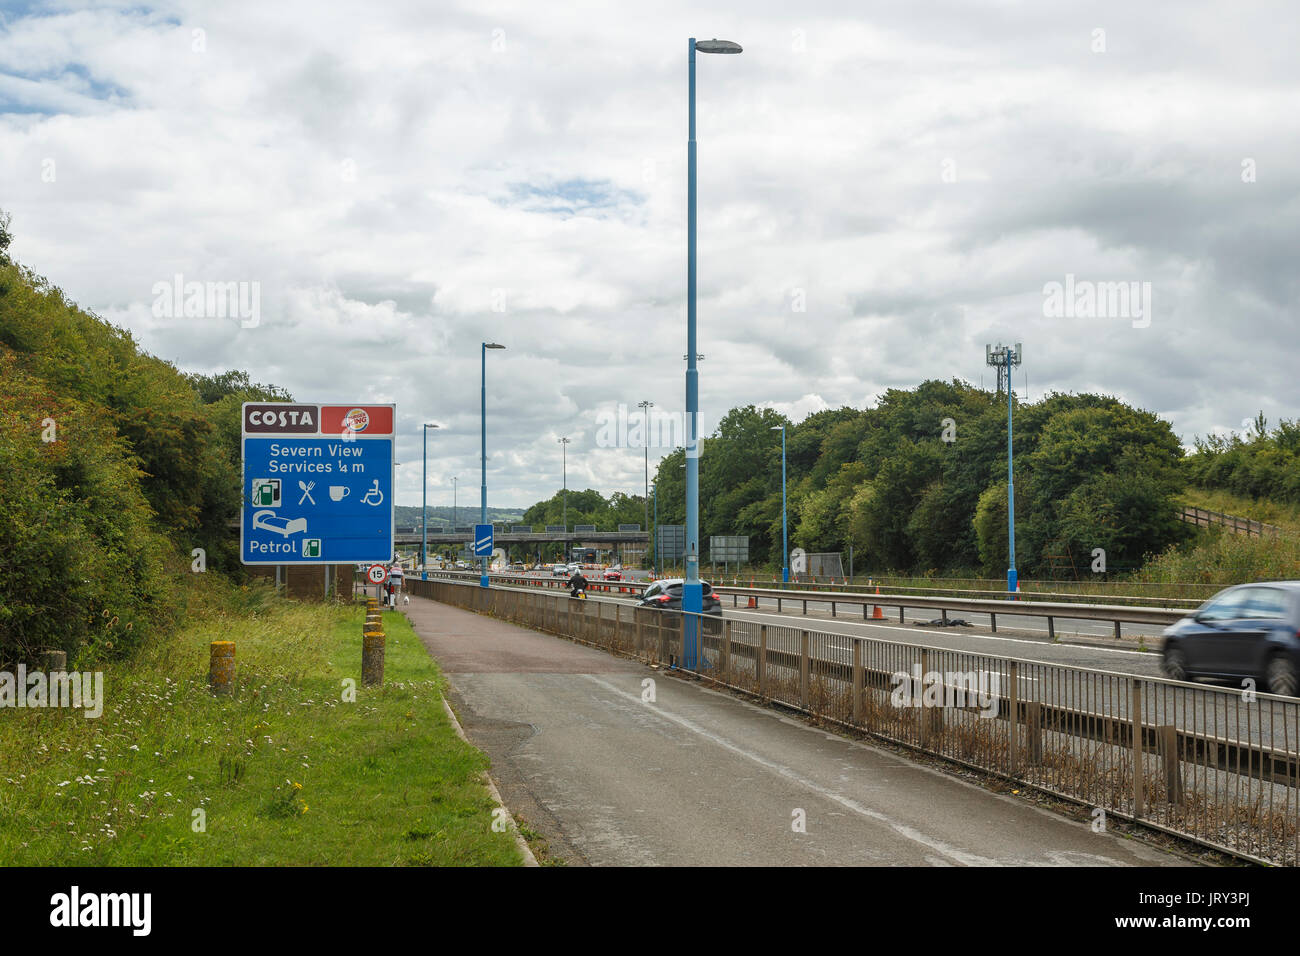 Road sign to the Severn View Services at the English end of the Severn Bridge (M48).  Moto, Costa Coffee. Stock Photo